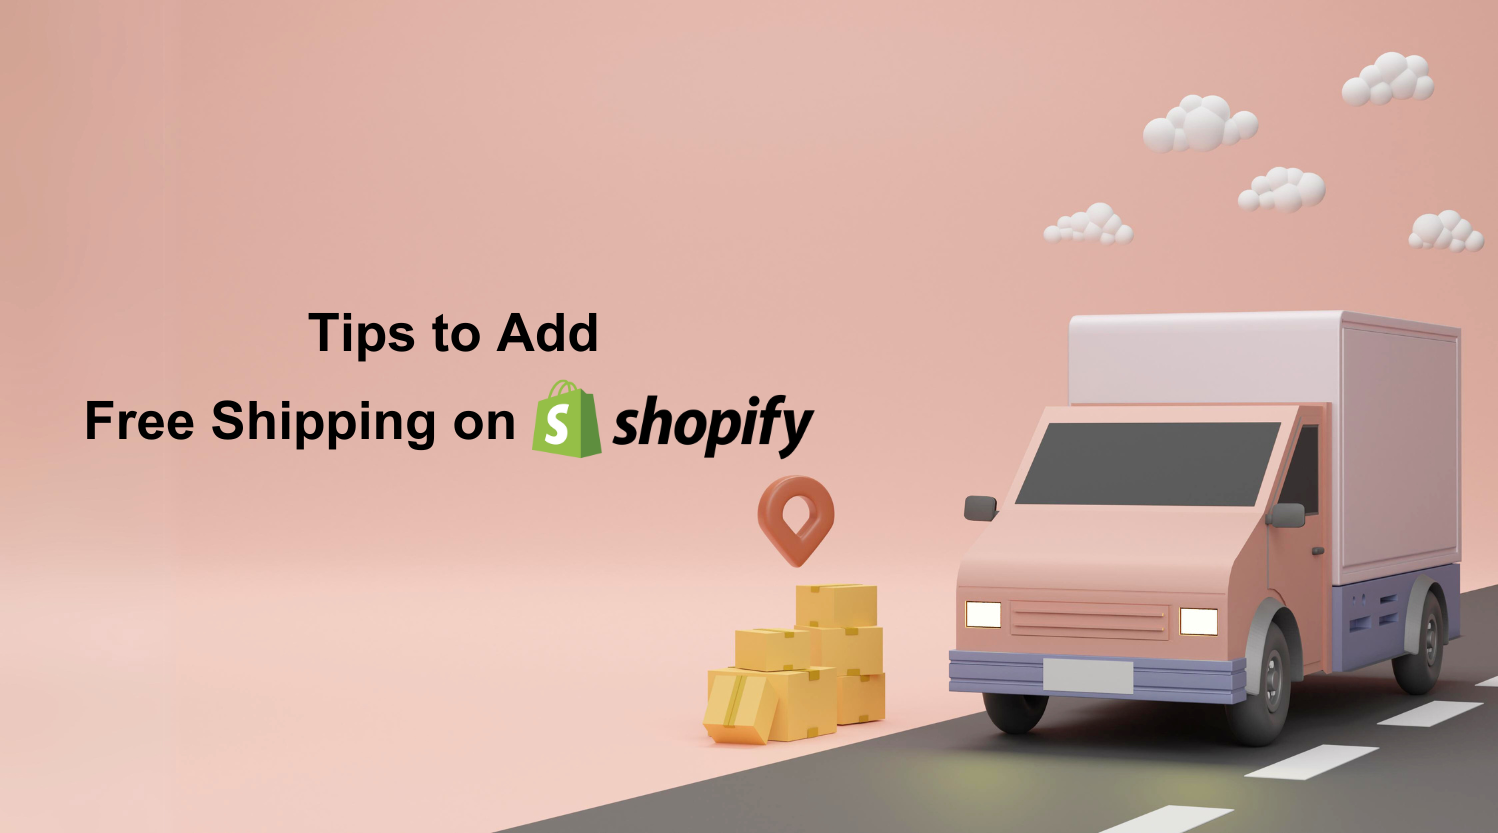 Tips to Add Free Shipping on Shopify